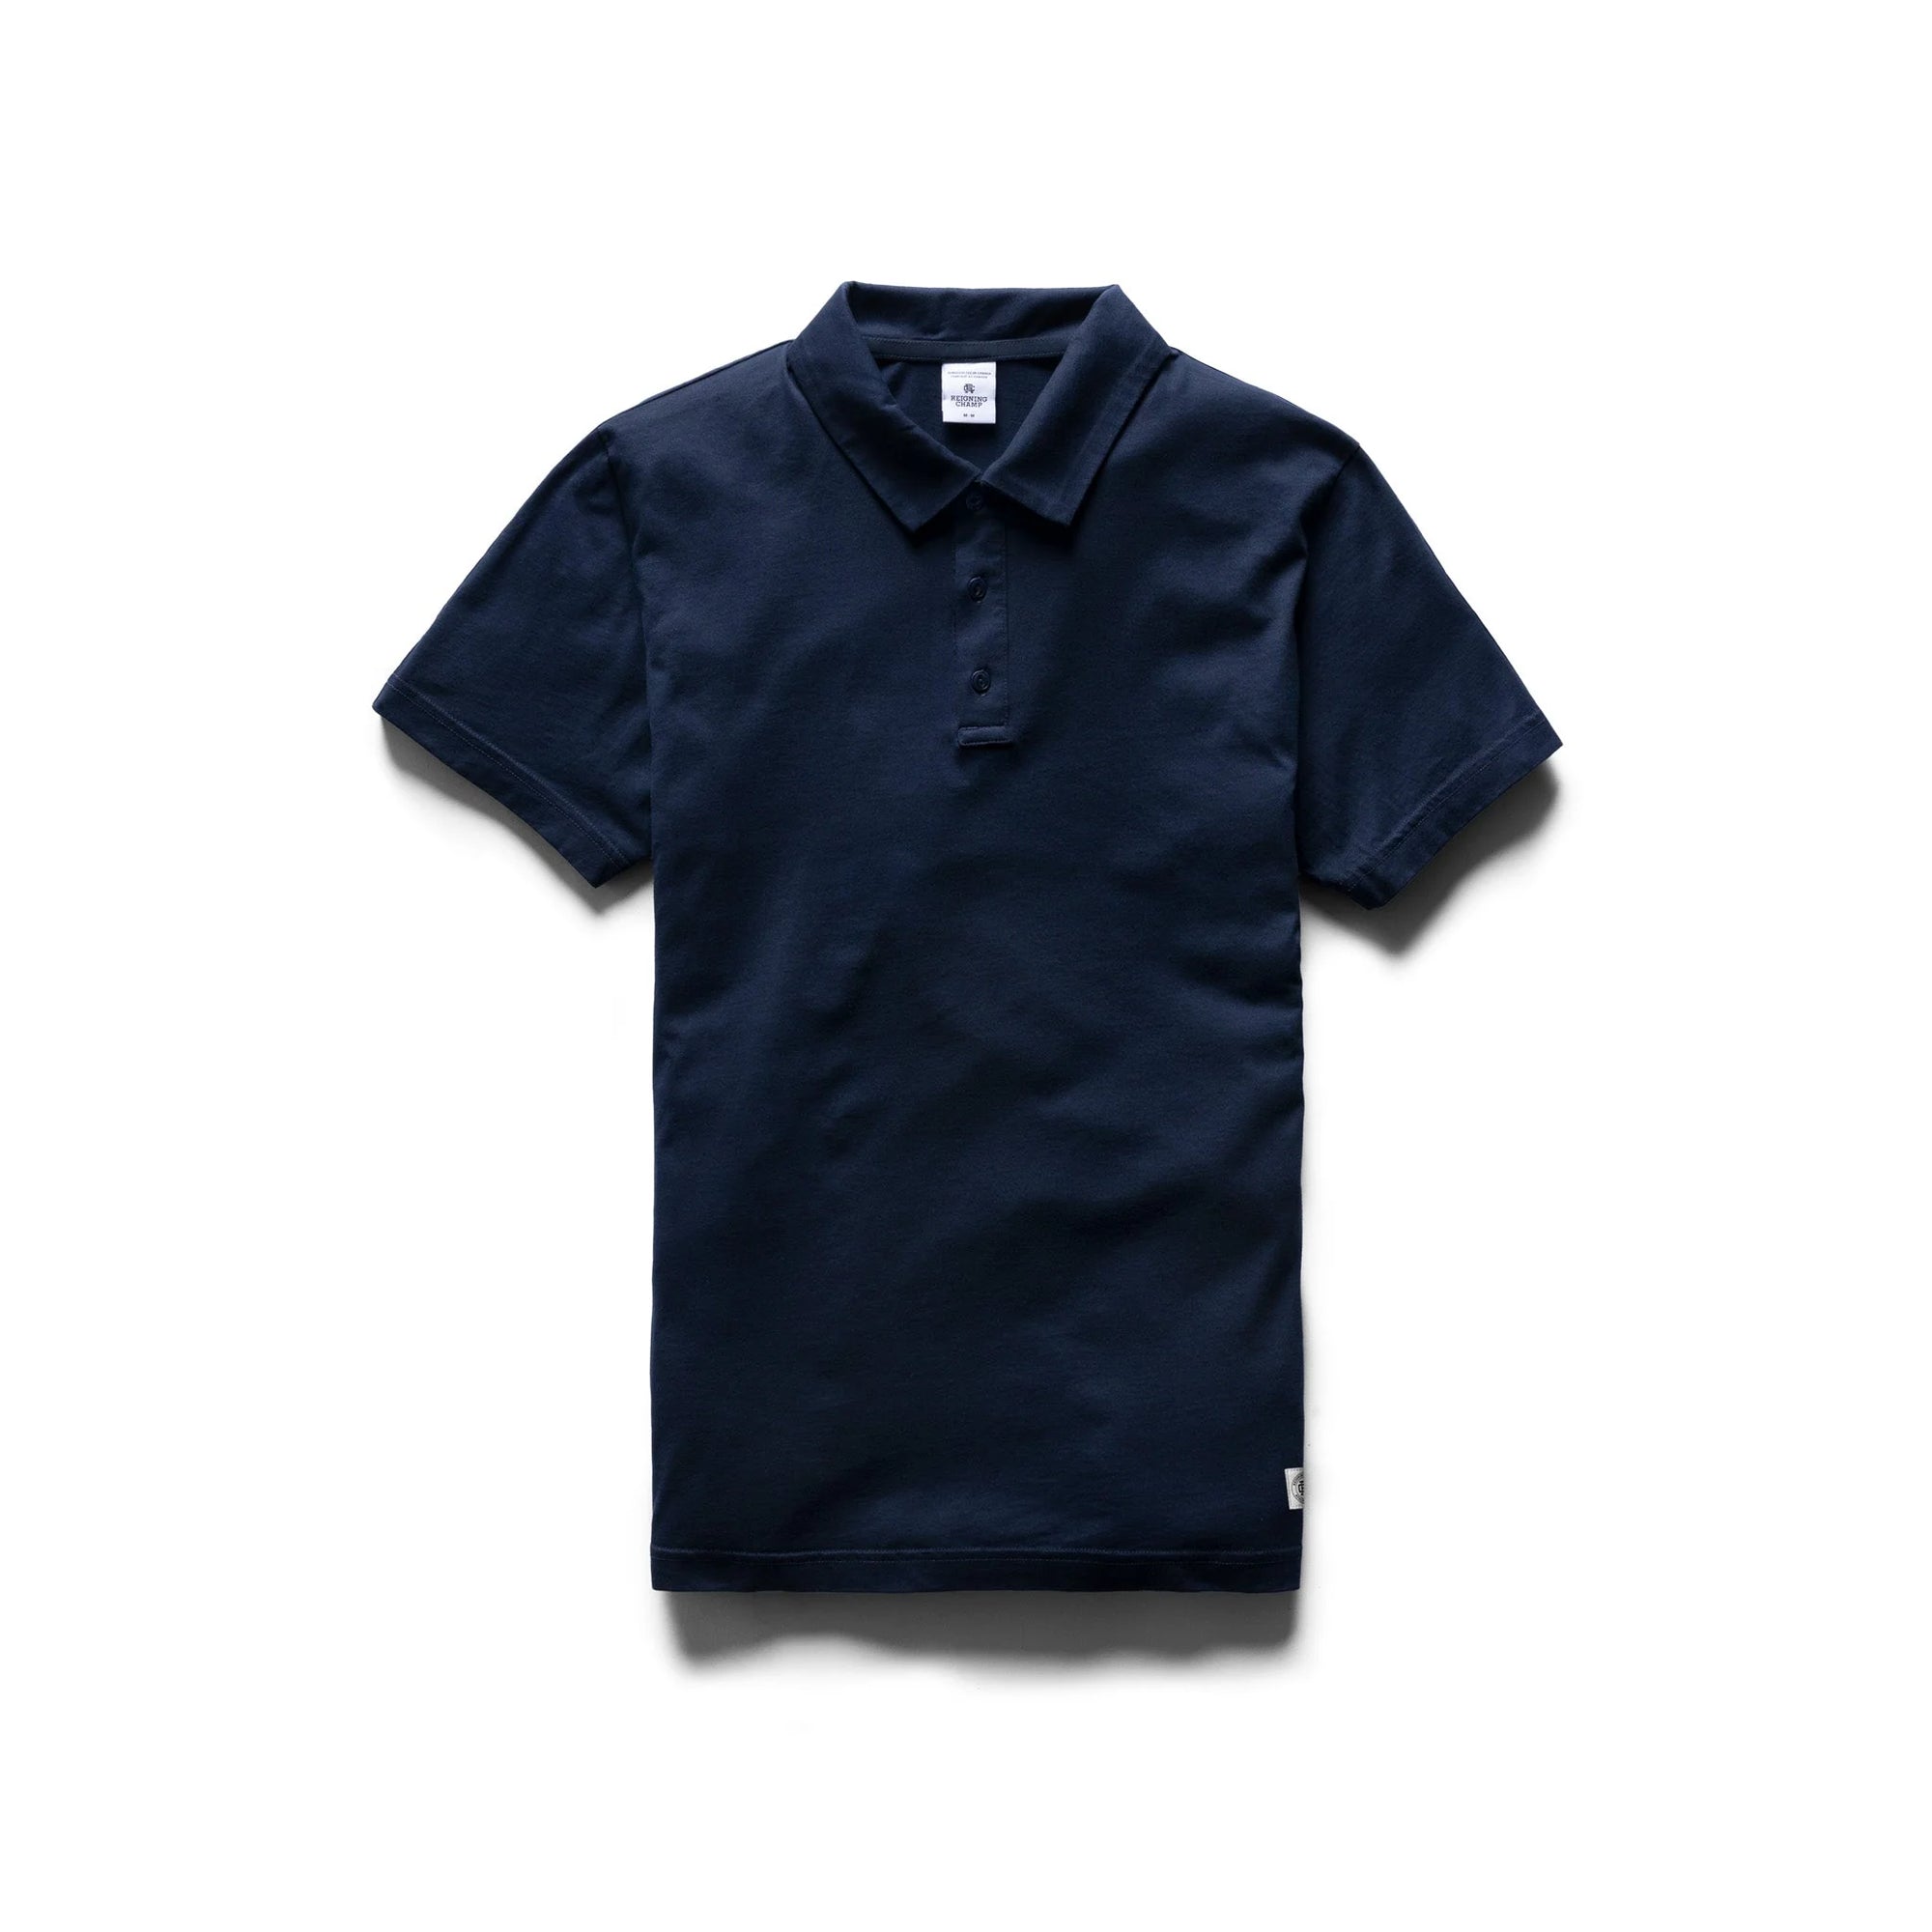 Reigning Champ Lightweight Jersey Polo in Navy